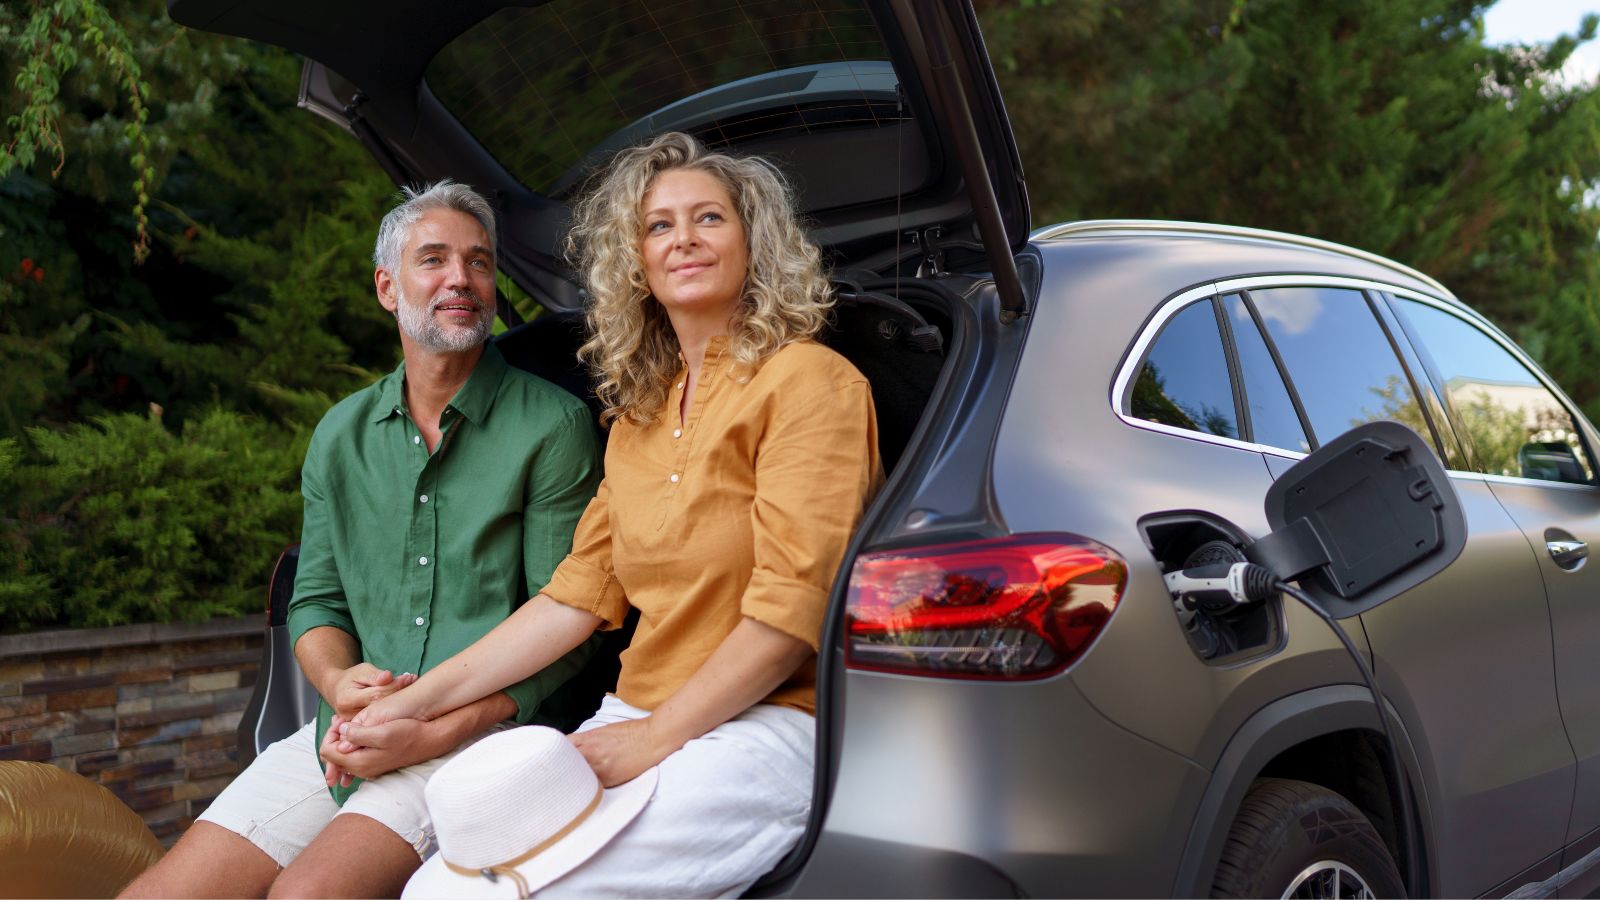 <p>Whether you go solo, with friends, or with family, road trips are a rite of passage in the U.S. </p> <p>But going in a vehicle powered by a gas or diesel engine is one thing. Bypassing the internal combustion engine car and hitting the open road in an electric vehicle (EV) is another thing entirely.</p> <p>If you have joined or plan to join the EV revolution and are in a road-tripping frame of mind, here are 17 things to consider before going on a road trip in a fully electric vehicle.</p>